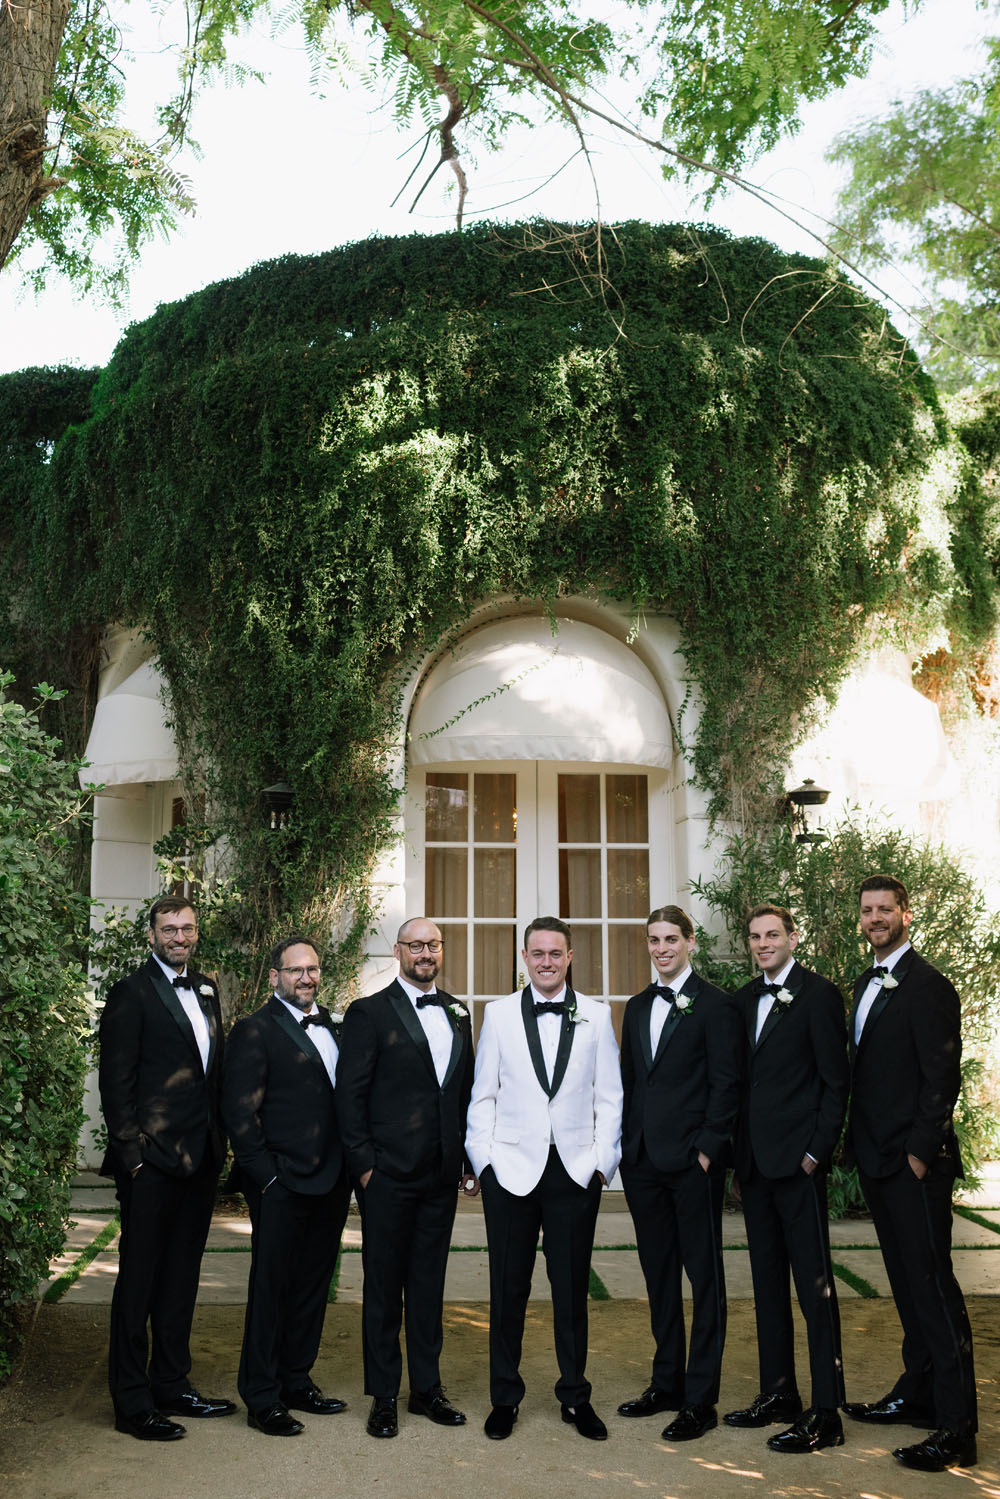 Groom in white tux jacket and groomsmen in black tuxes